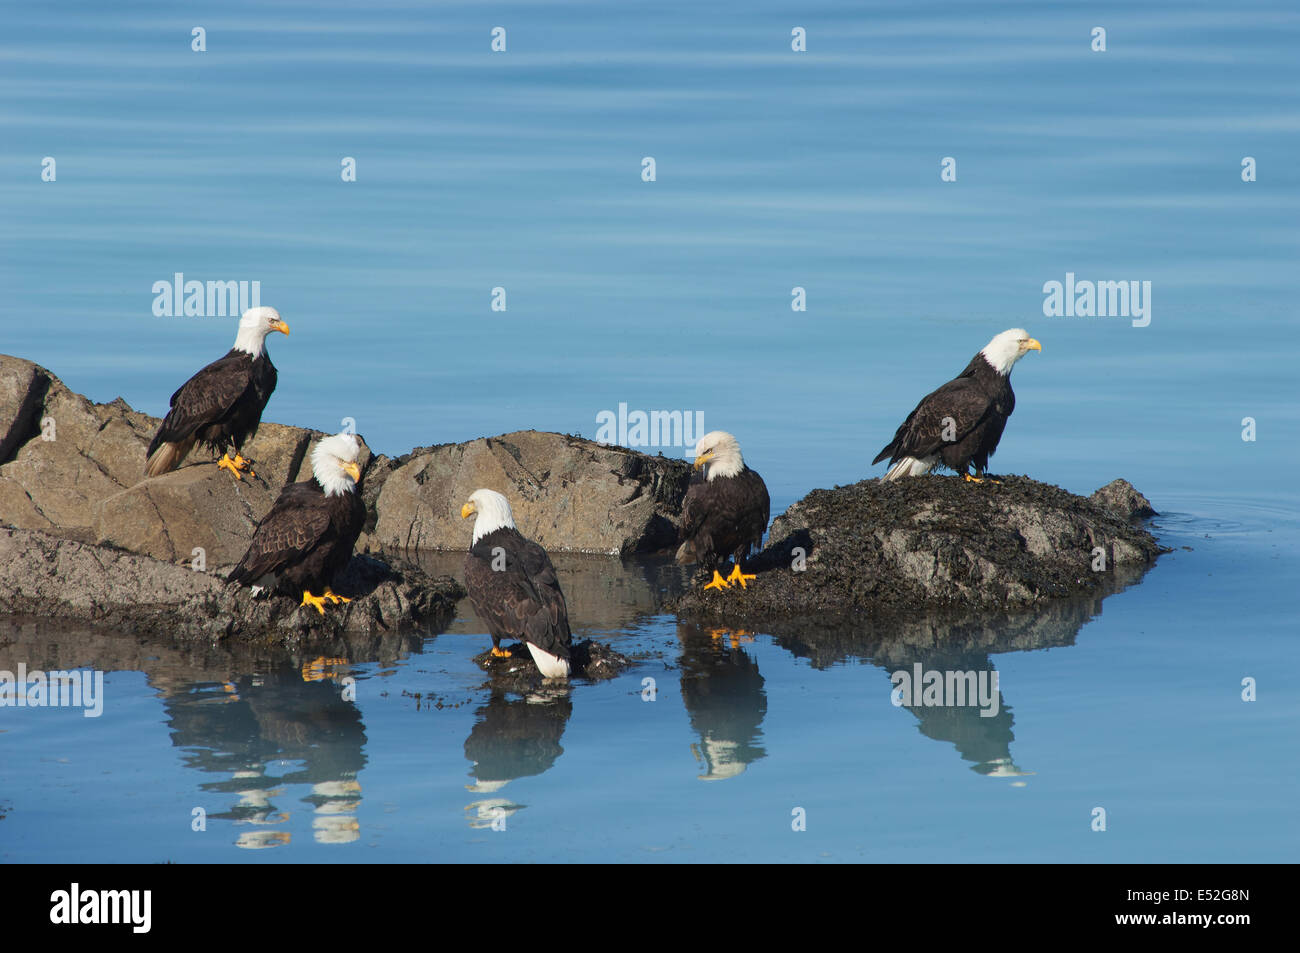 A group of bald eagles, Haliaeetus leucocephalus, perched on rocks by water. Stock Photo